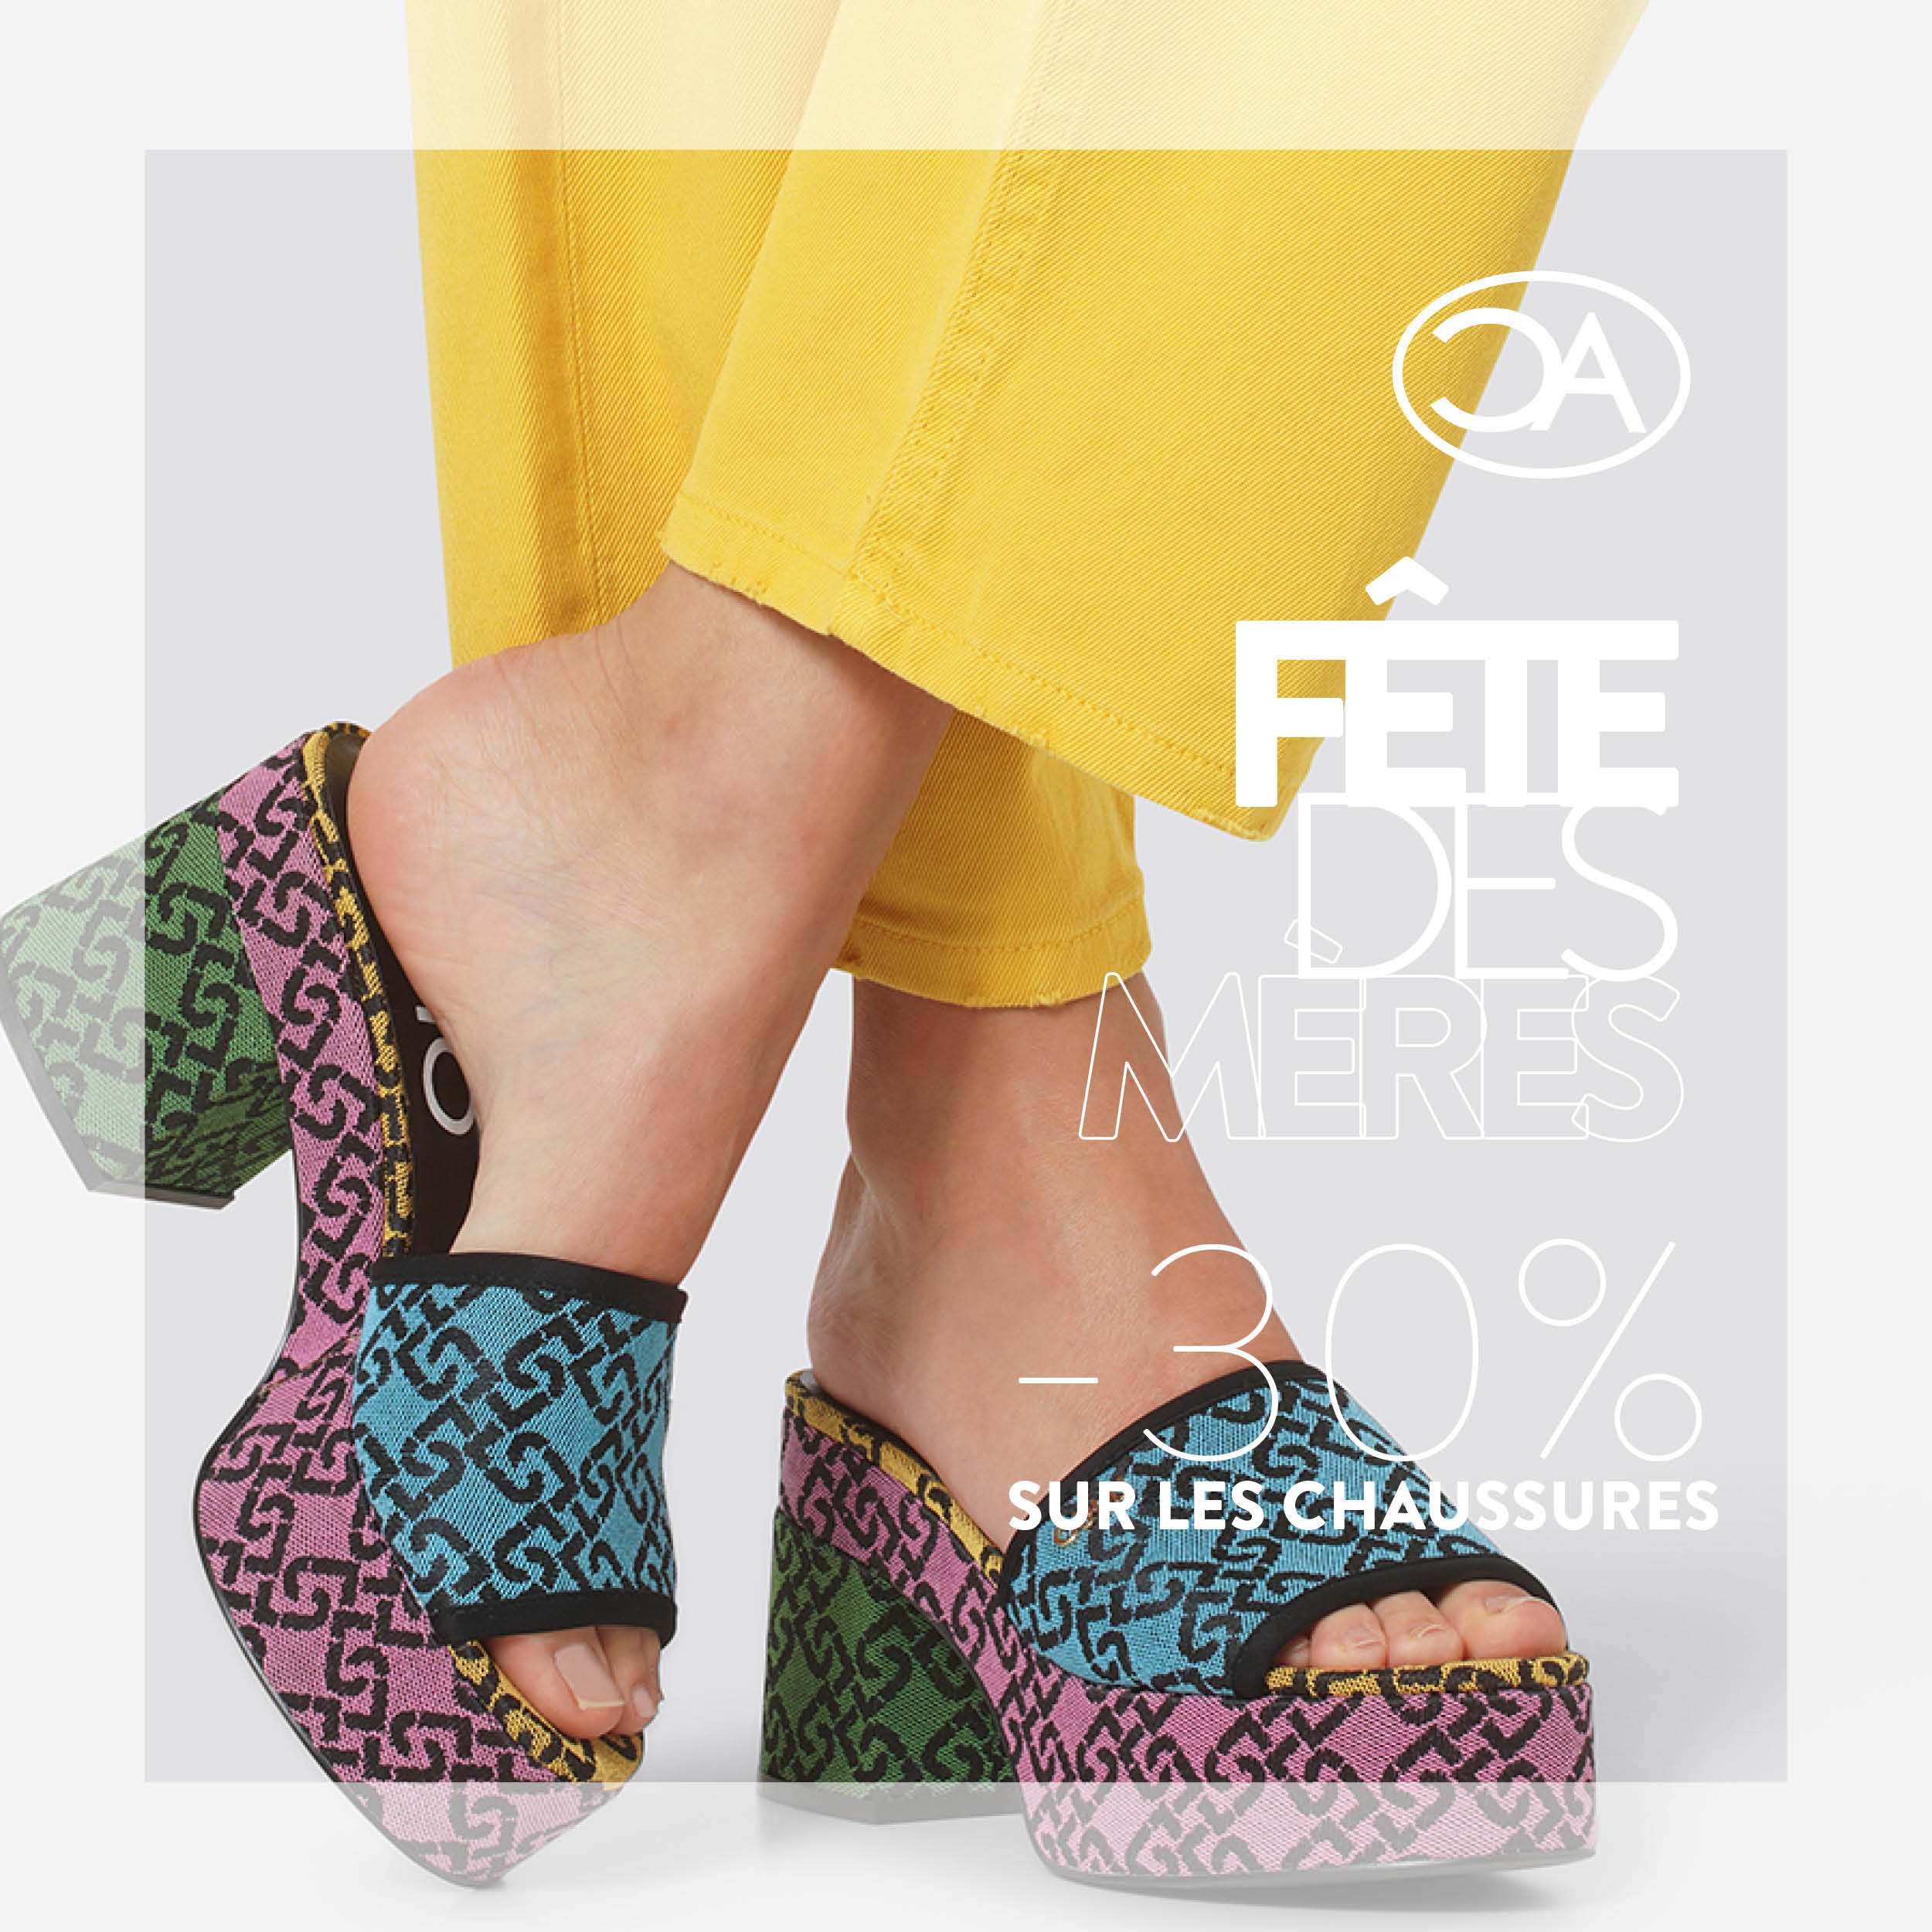 Carre_FeteDesMeres_Chaussures_2